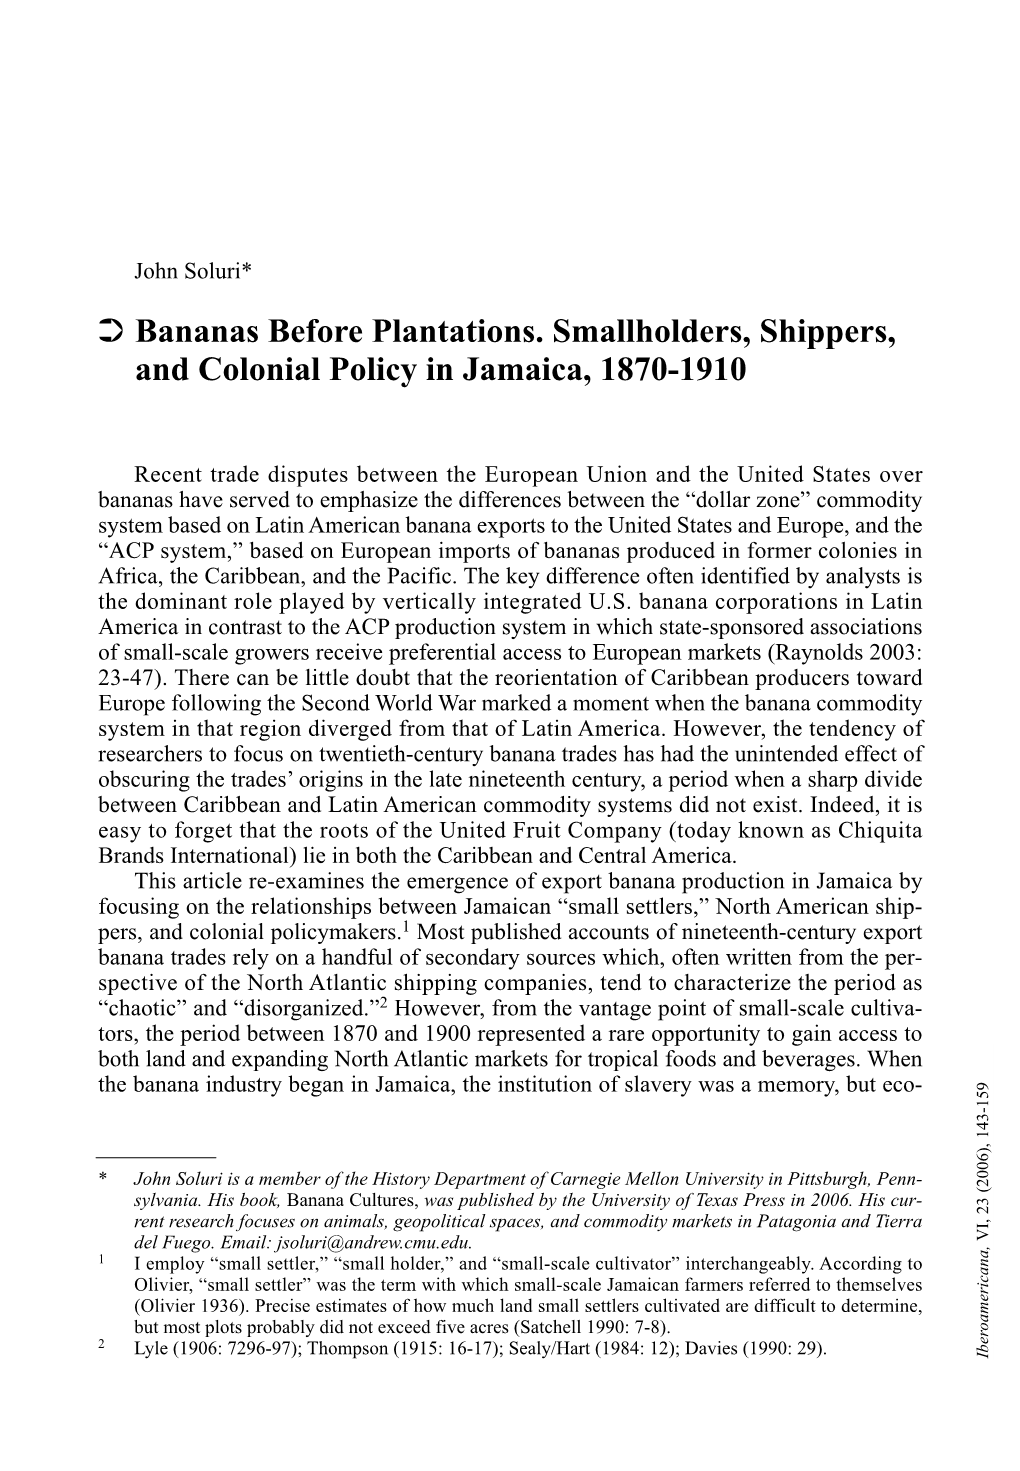 Bananas Before Plantations. Smallholders, Shippers, and Colonial Policy in Jamaica, 1870-1910